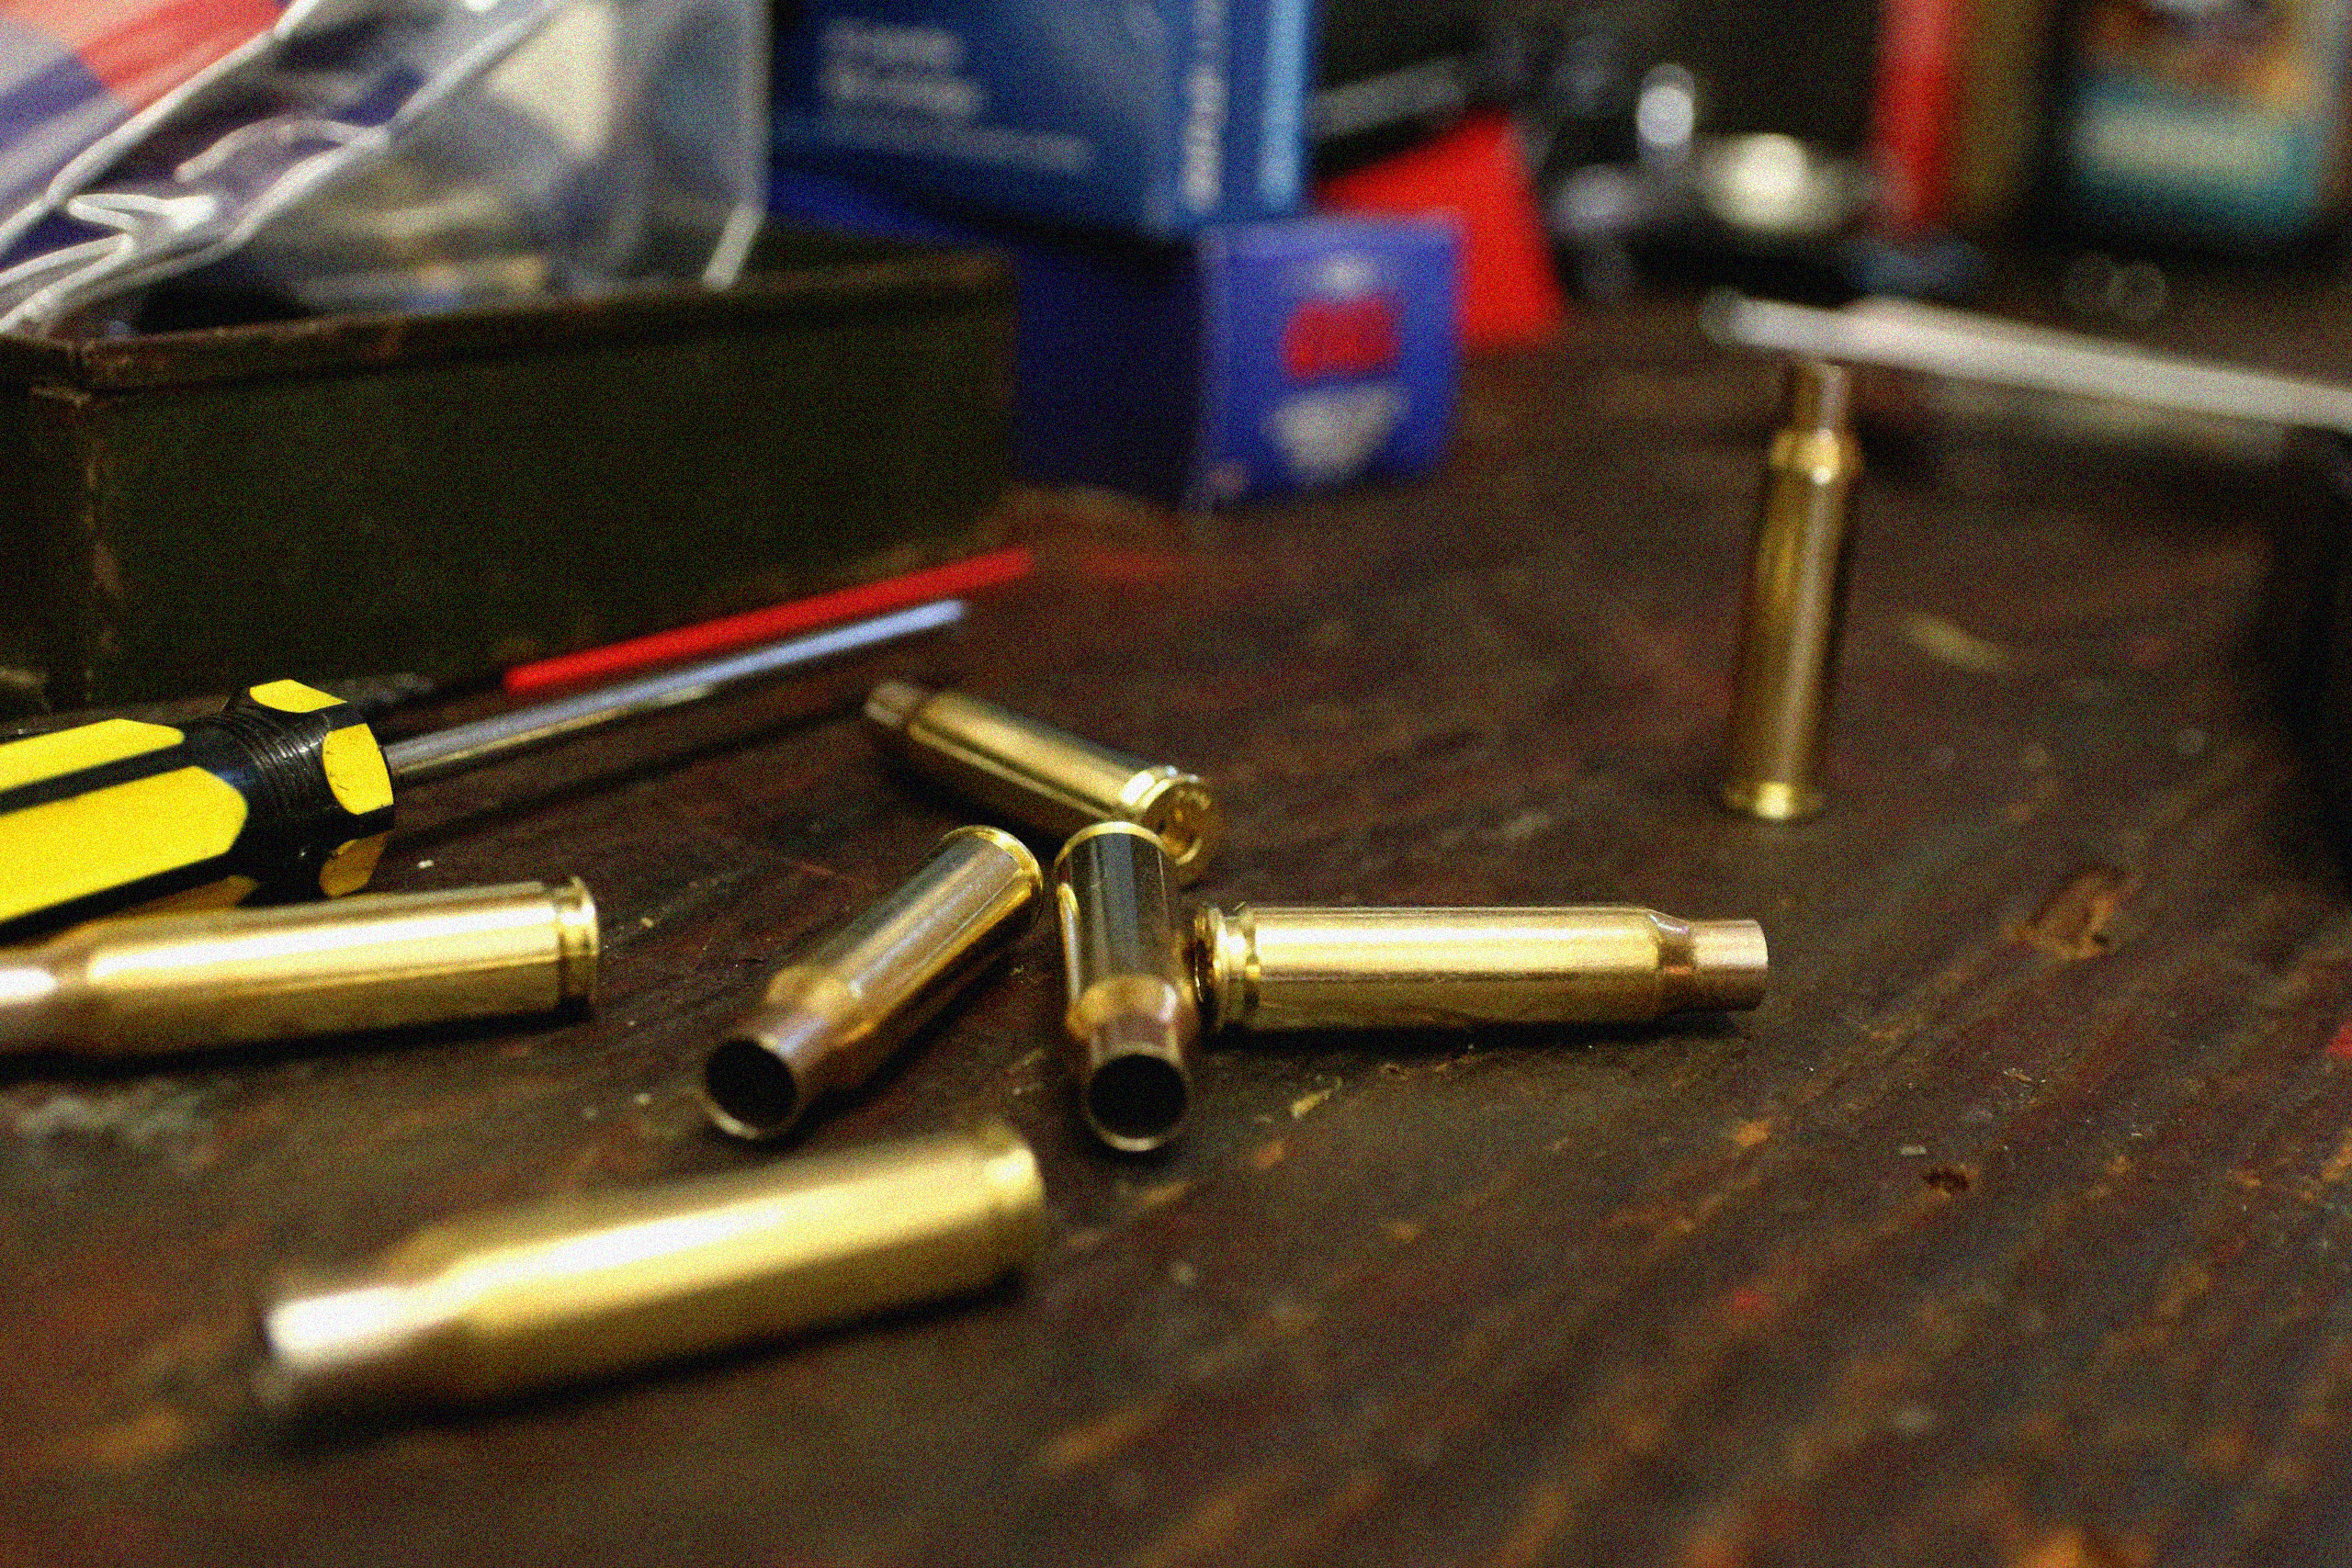 How to clean dirty brass ammo?